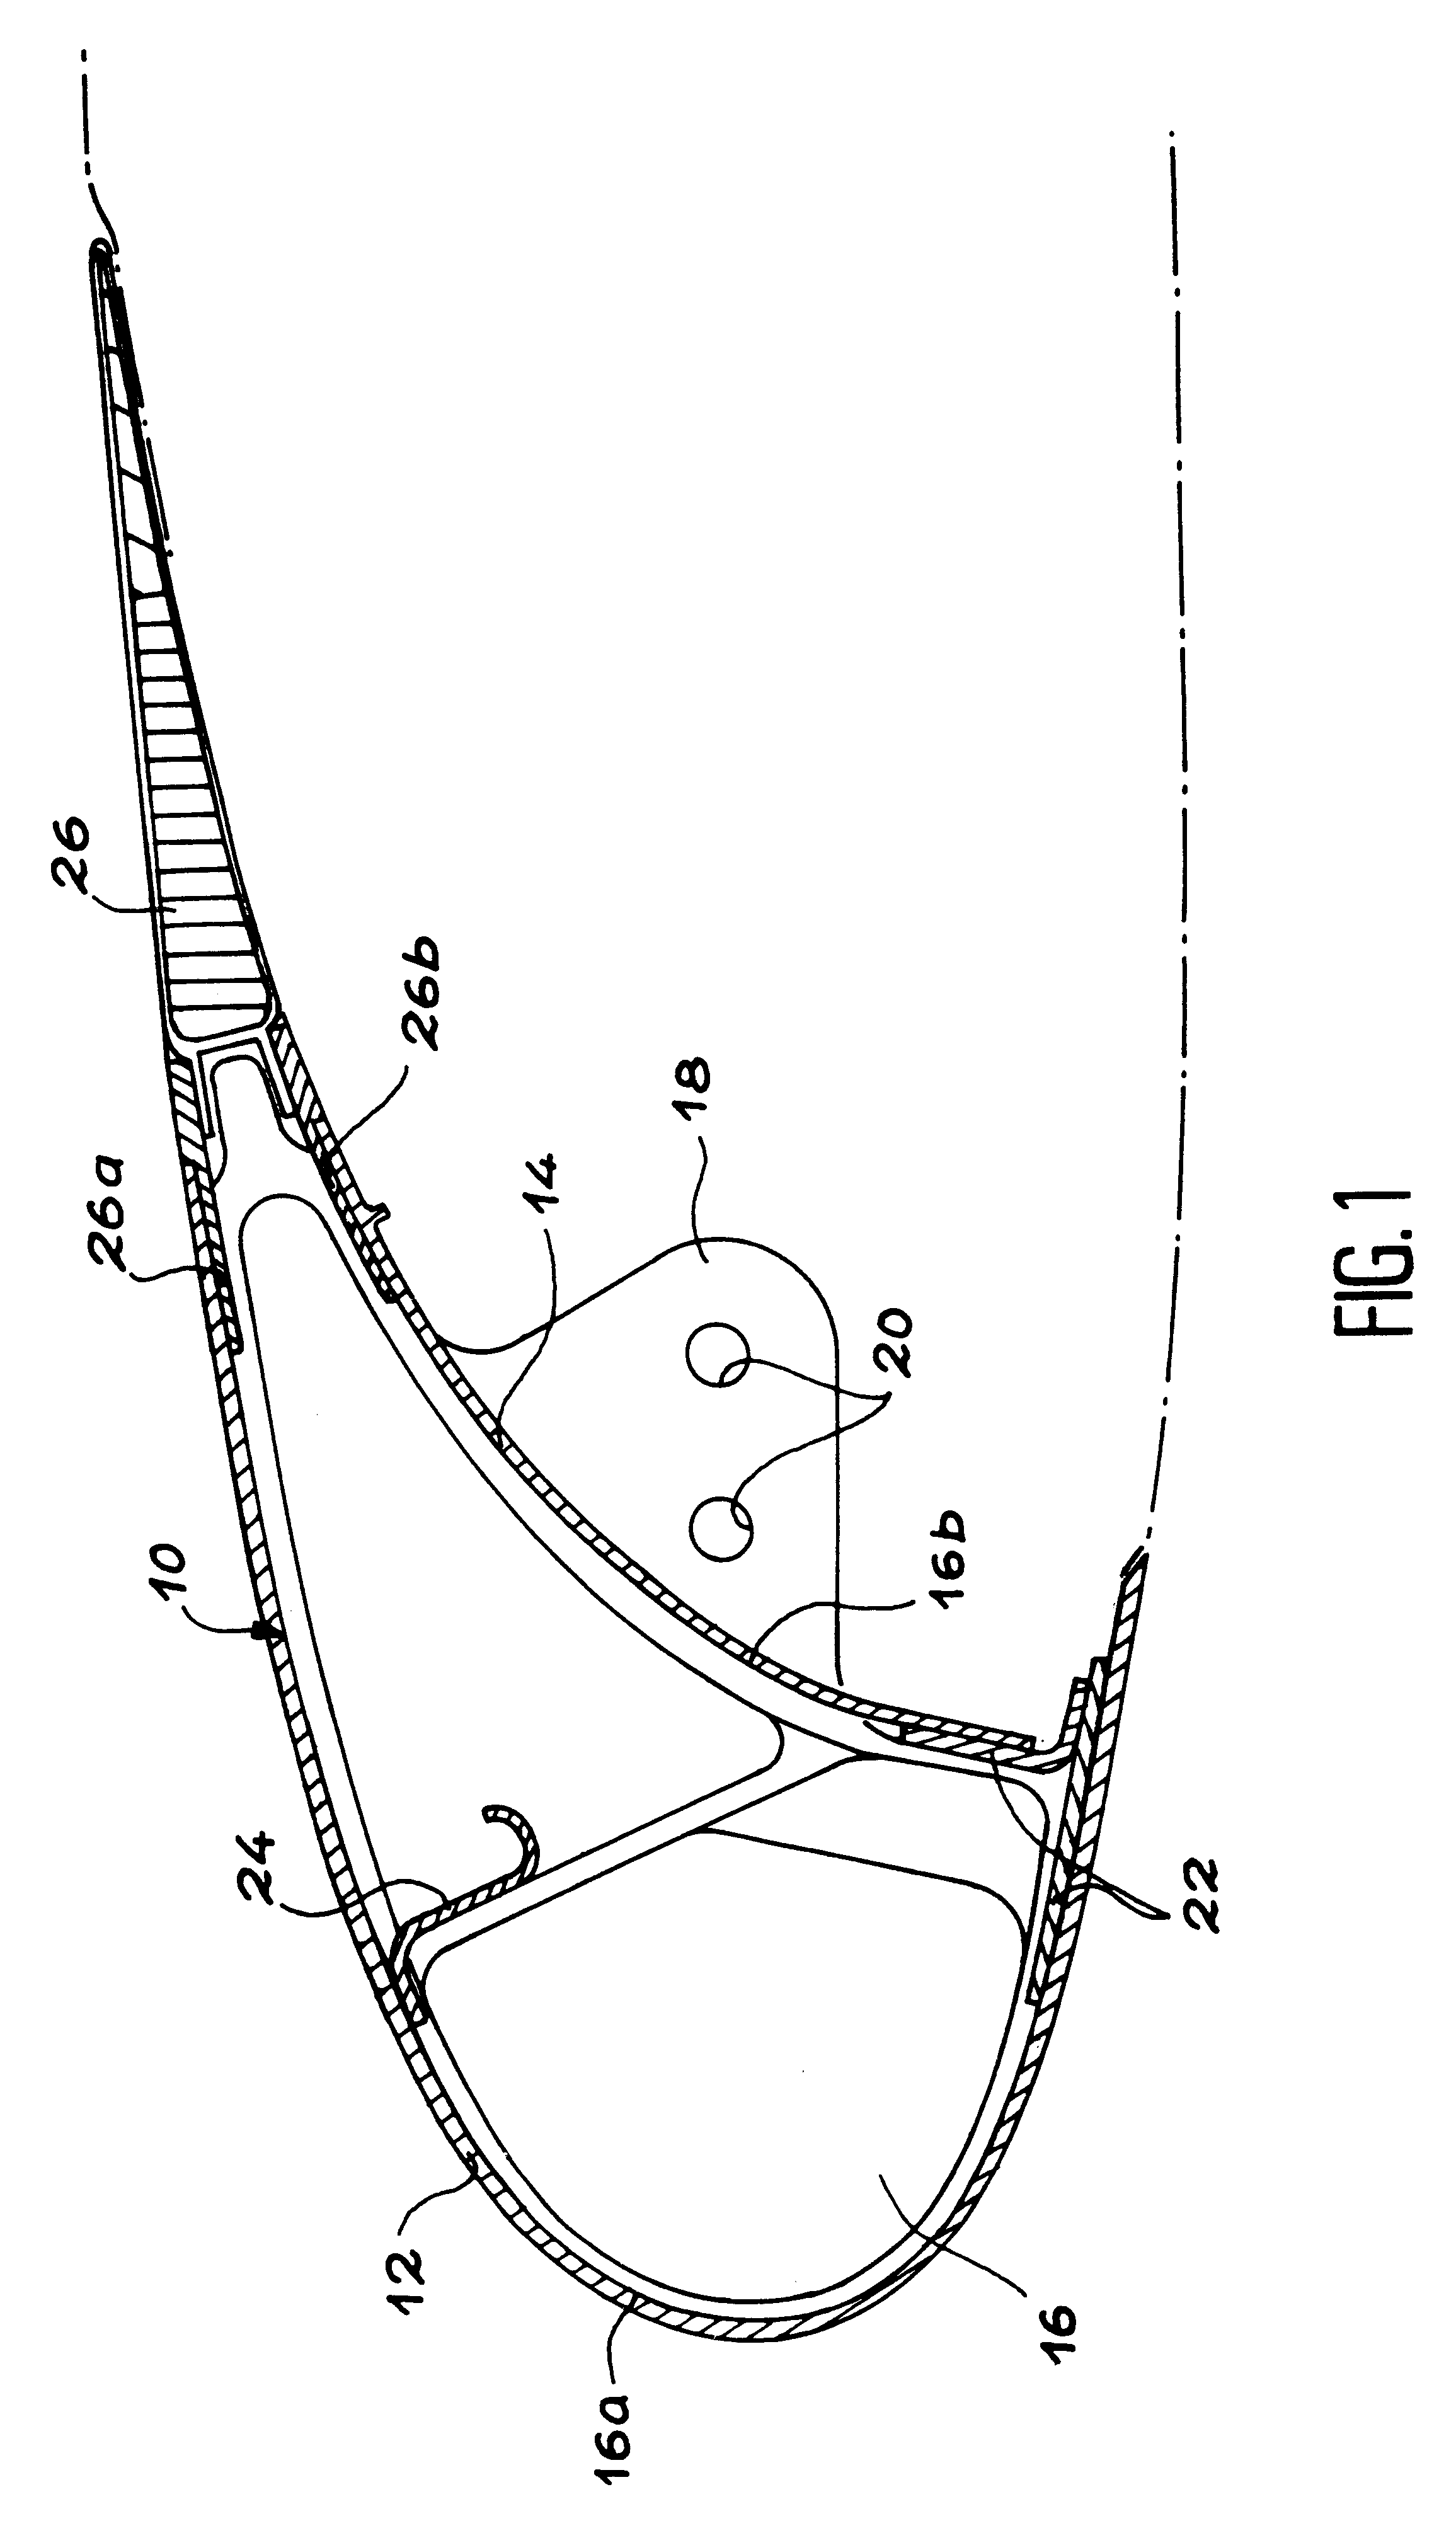 Process for assembly of a flexible panel on an open structure and installation for use of this process